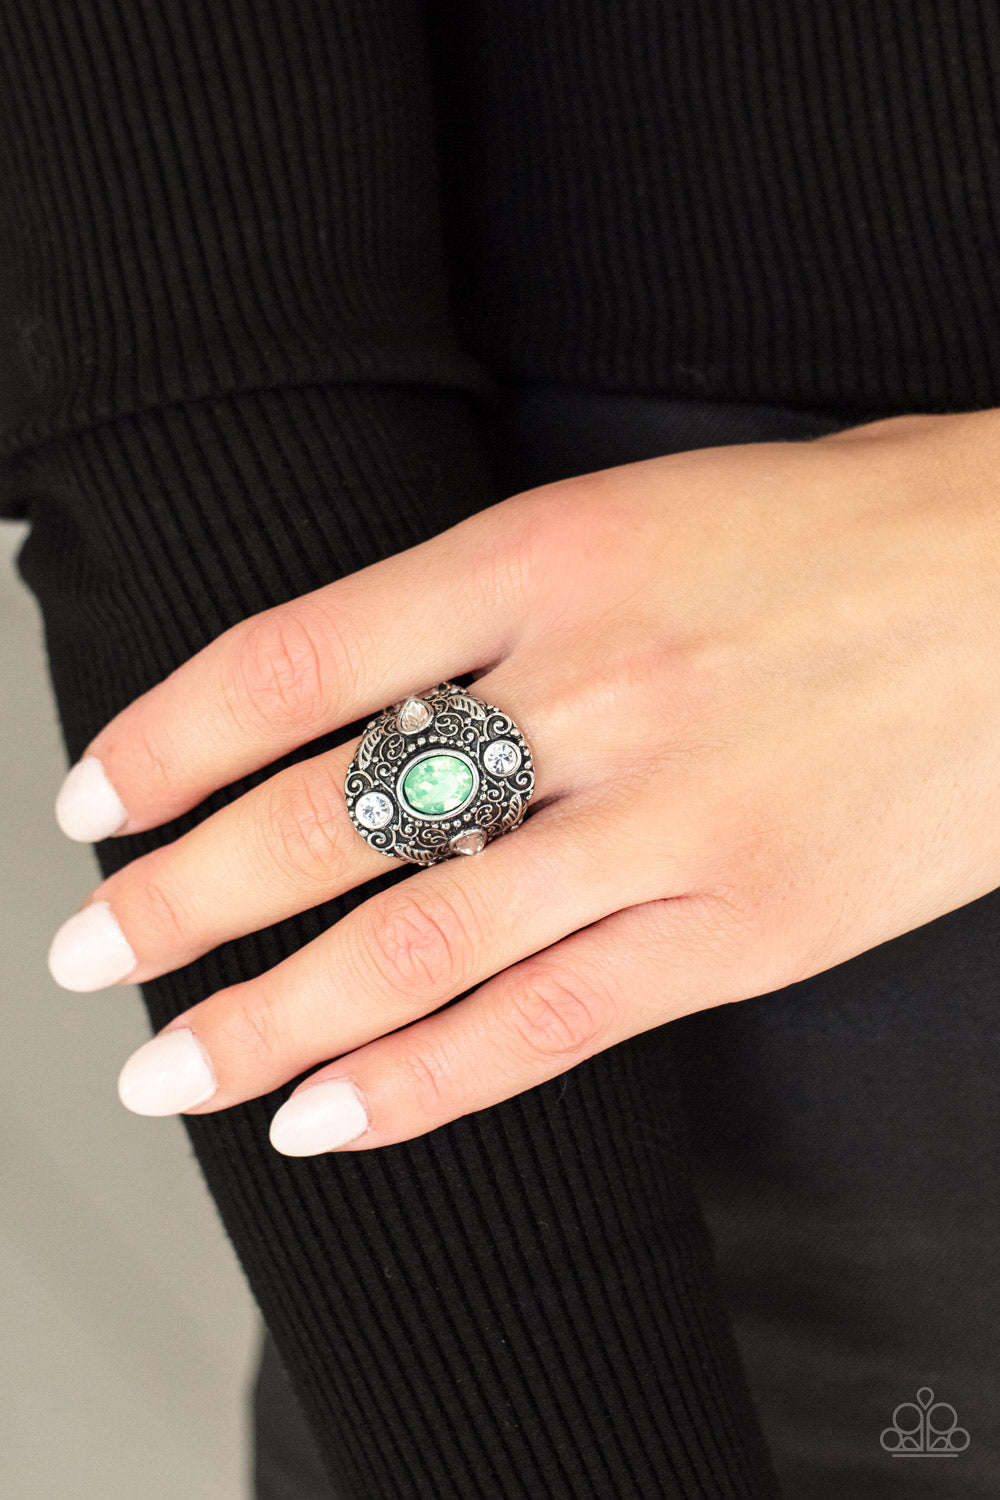 In The Limelight - Green Gem and Filigree Ring - Paparazzi Accessories